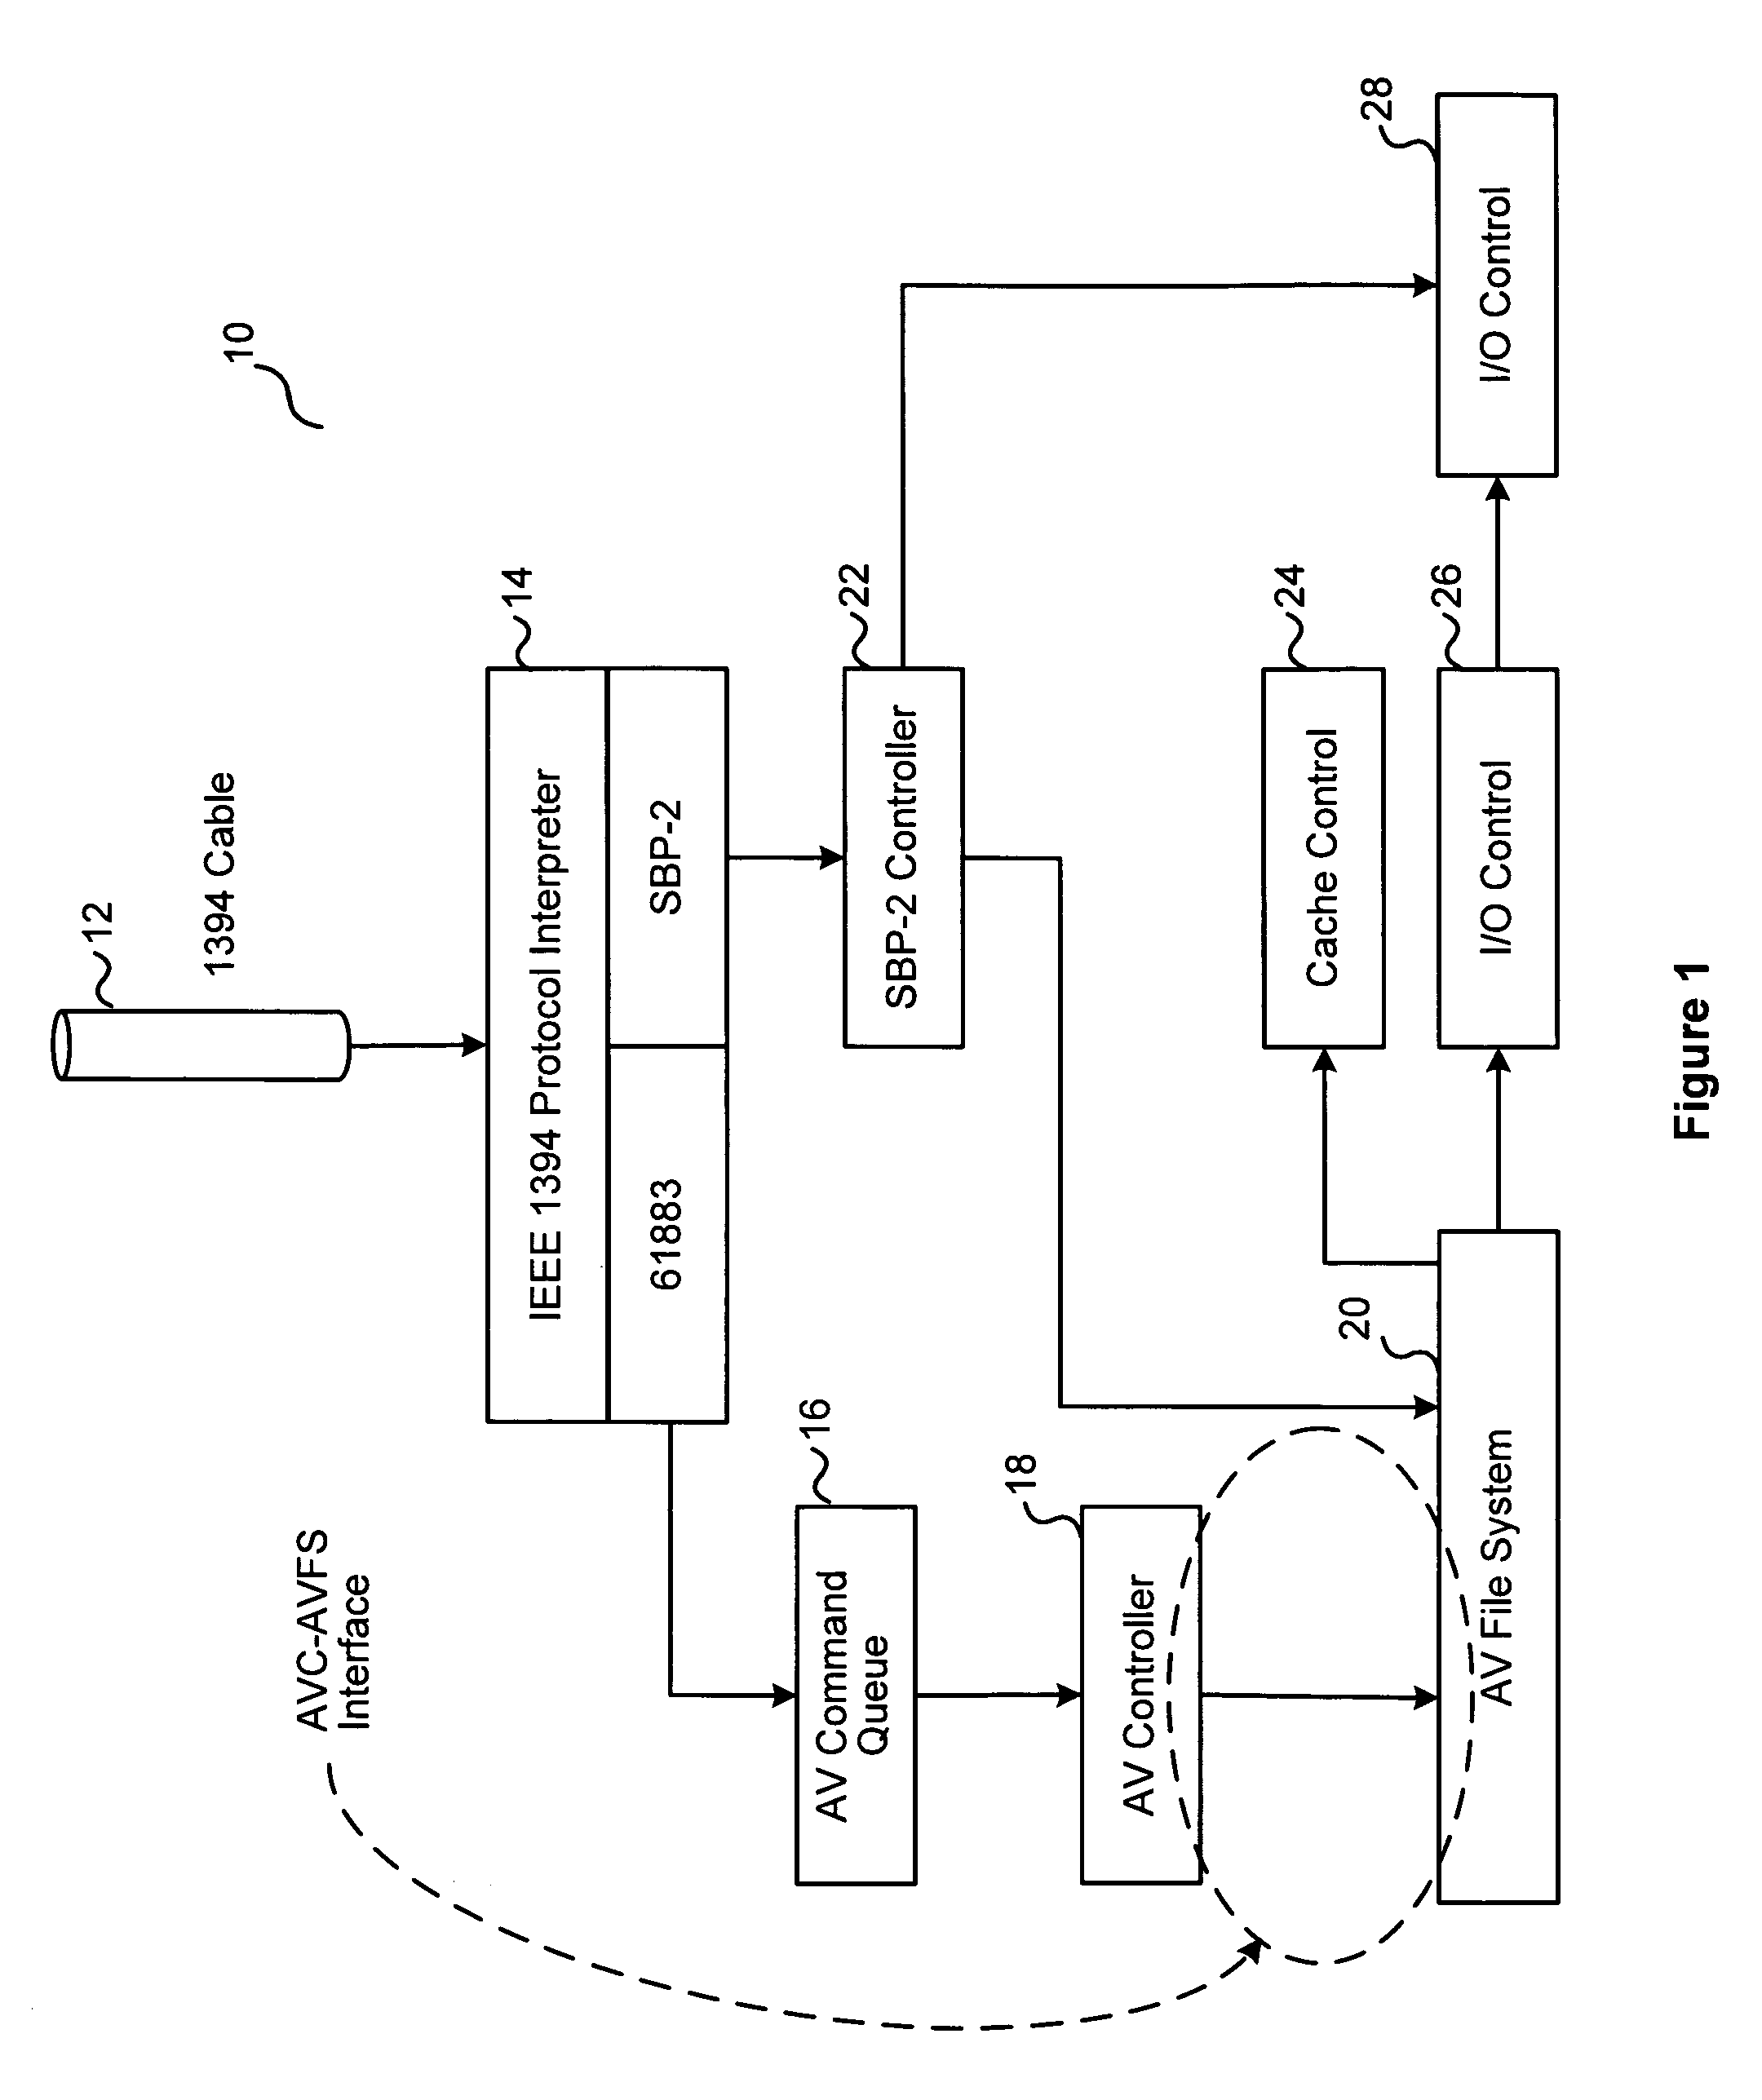 Application programming interface for communication between audio/video file system and audio video controller